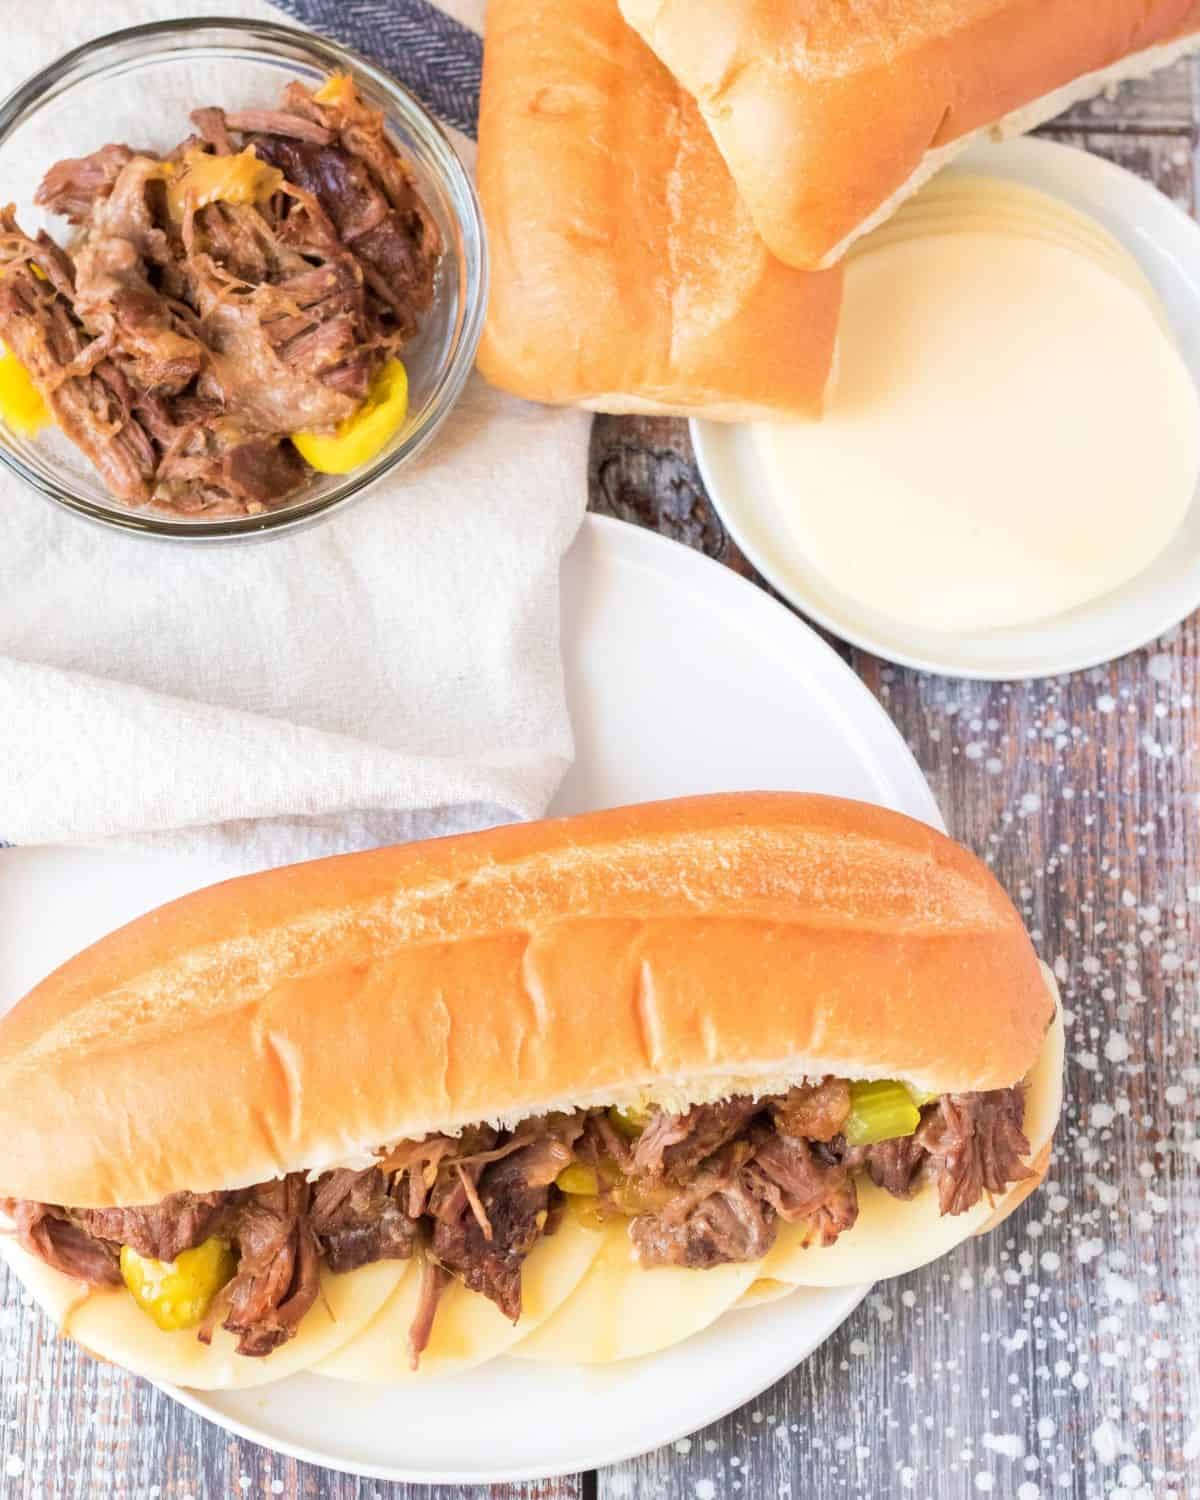 Slow Cooker Italian beef sandwiches on hoagie bread with provolone cheese and pepperocini peppers. 